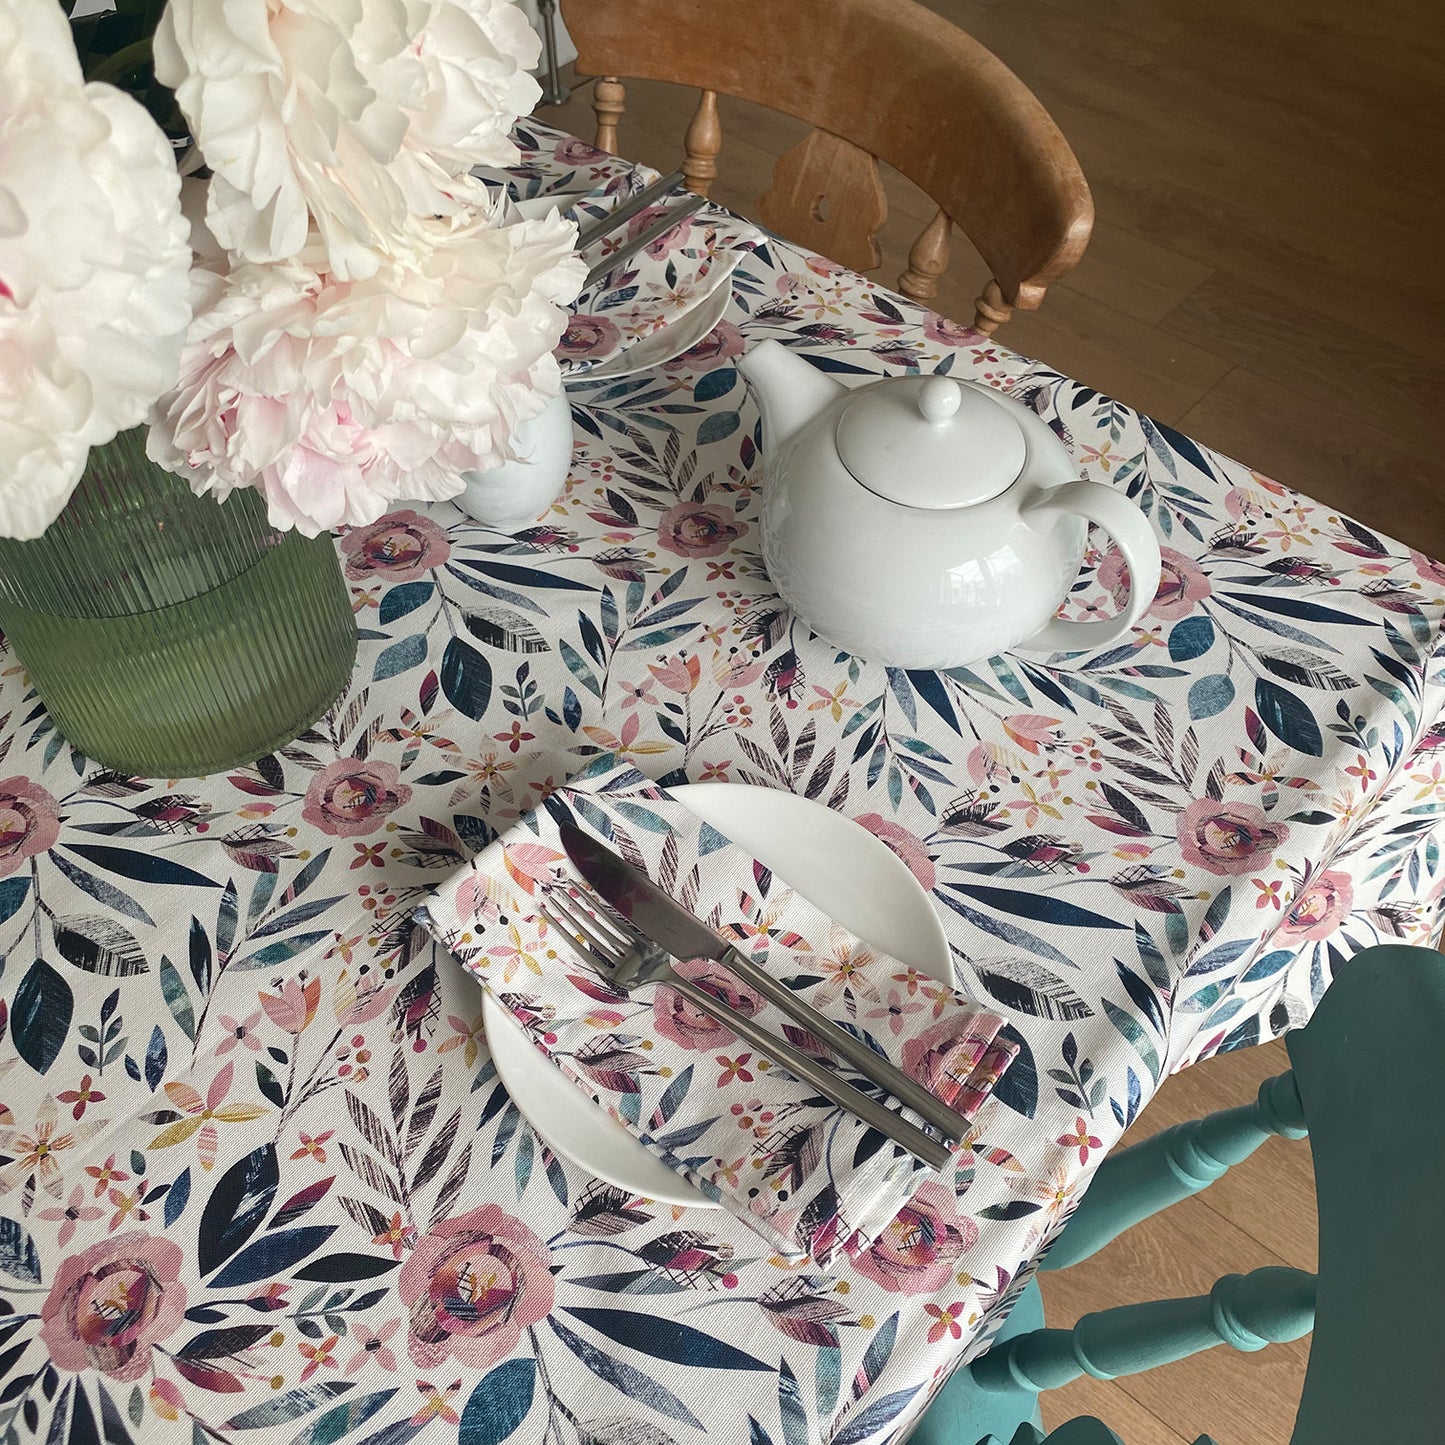 Summer Floral Table cloth featuring textured dusky pink roses and green foliage on a white background. The table has been set with 2 chairs and two small side plates and a tea pot and cups. a vase of flowers in in the middle of the table.